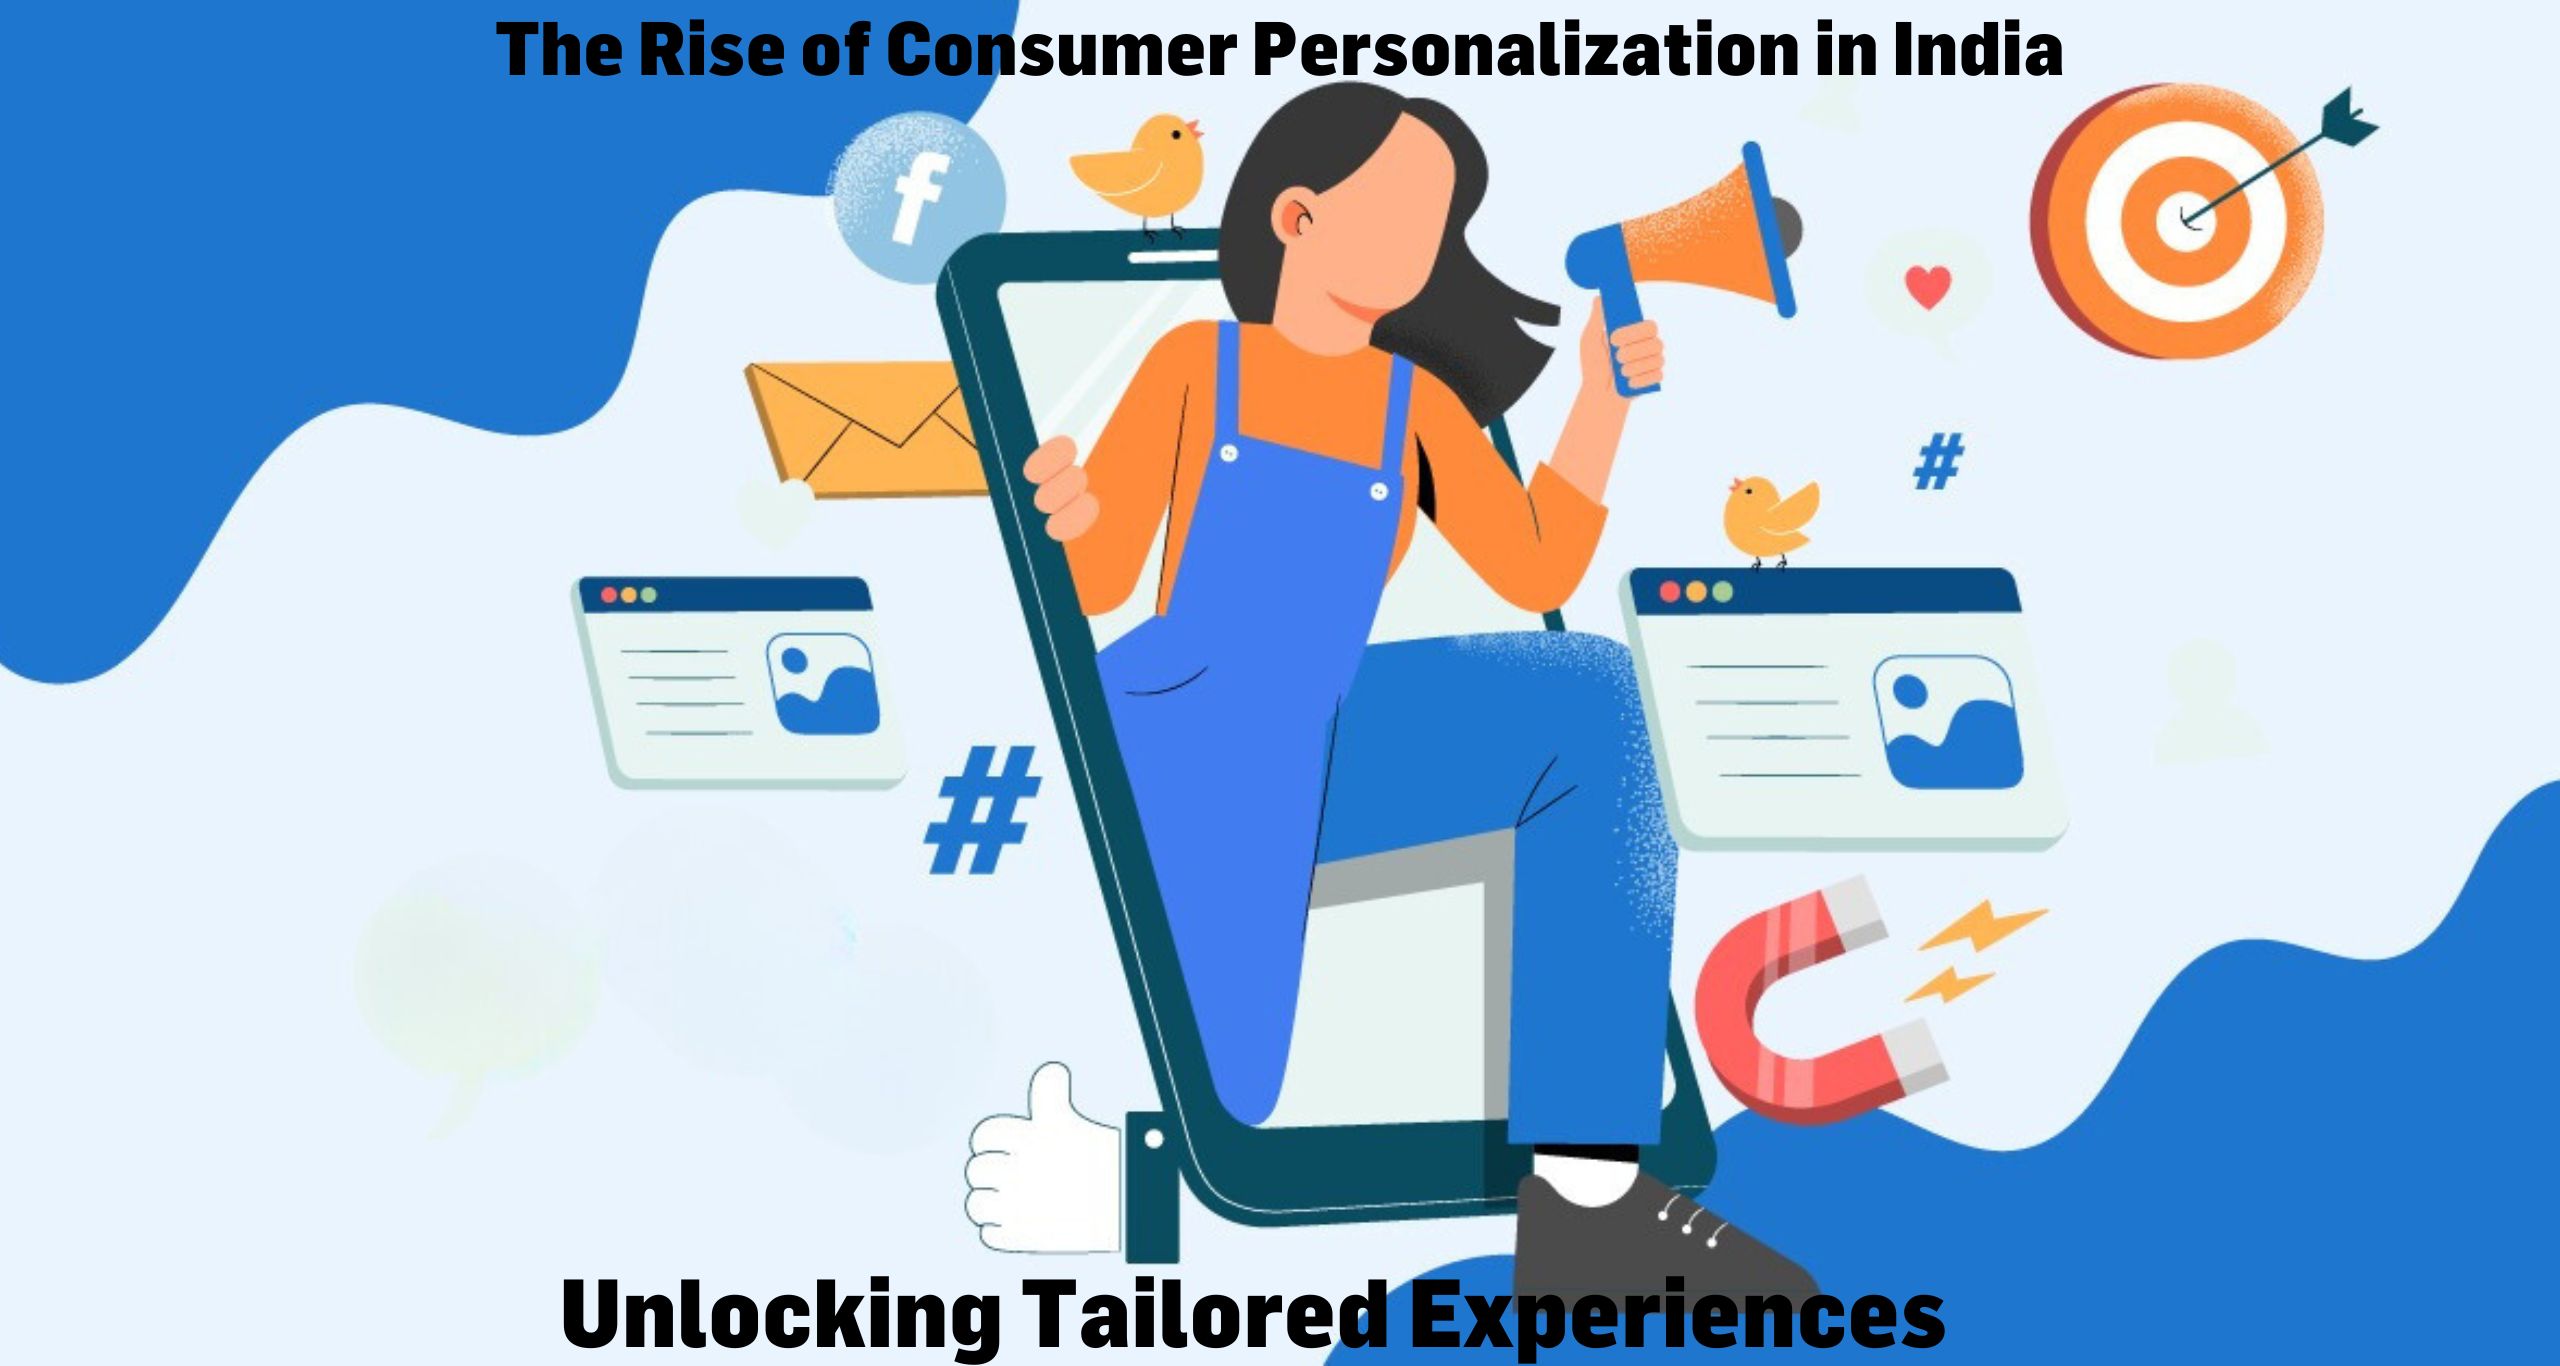 The Rise of Consumer Personalization in India: Unlocking Tailored Experiences